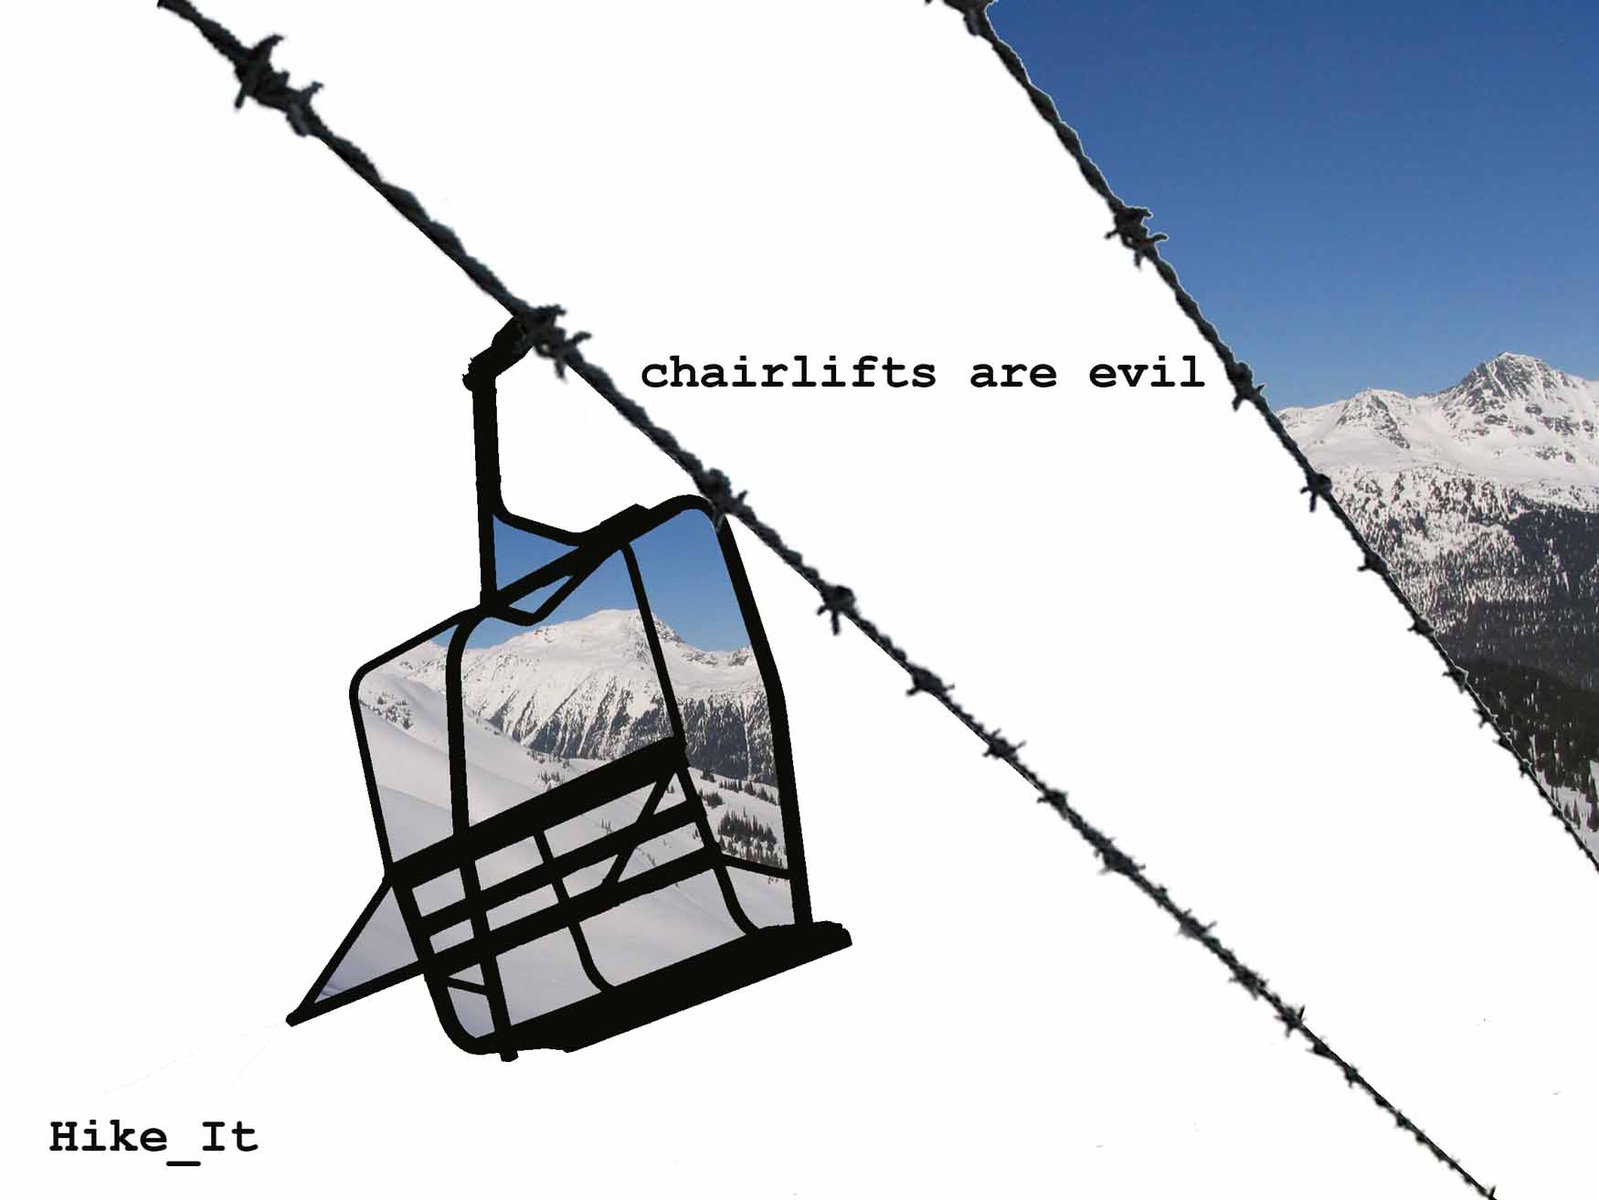 Chairlifts are evil